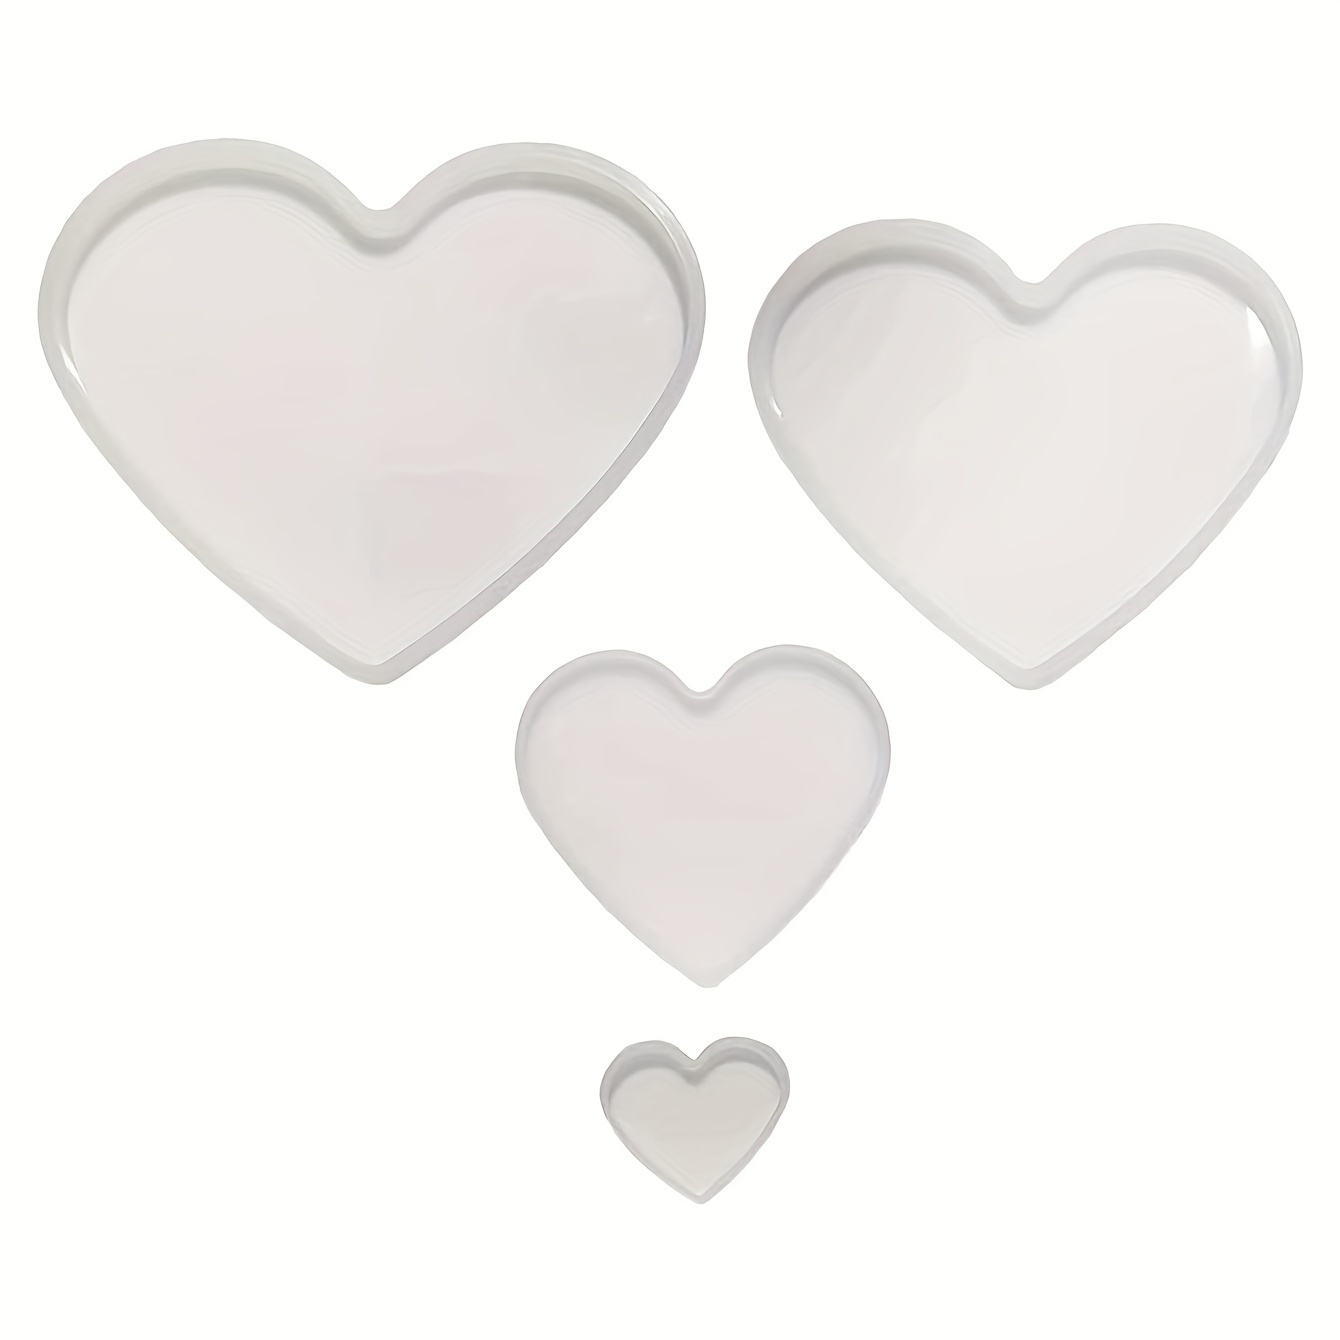 

4pcs Heart Resin Mold Love Heart Shape Epoxy Mold With 7", 6", 4", 2" Resin Heart Casting Silicone Mold Gift Craft Wedding Decor